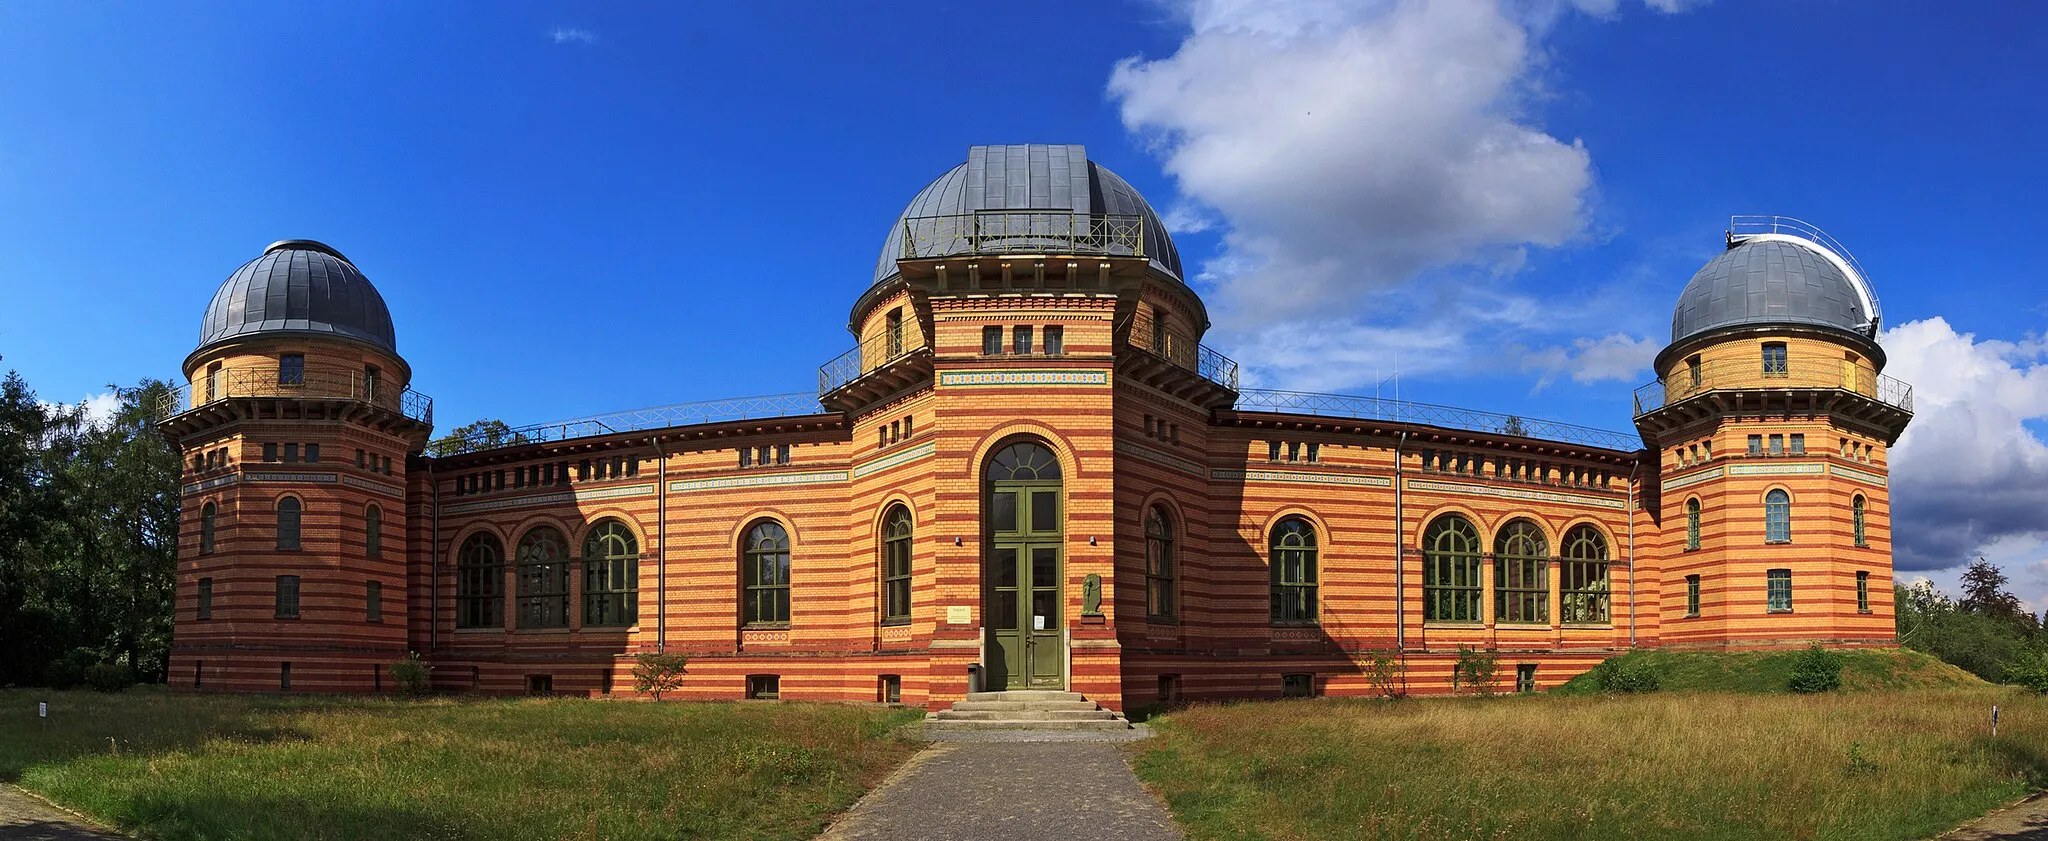 Photo showing: The Astrophysical Observatory in Potsdam, Germany. The building now hosts the Potsdam Institute for Climate Impact Research.